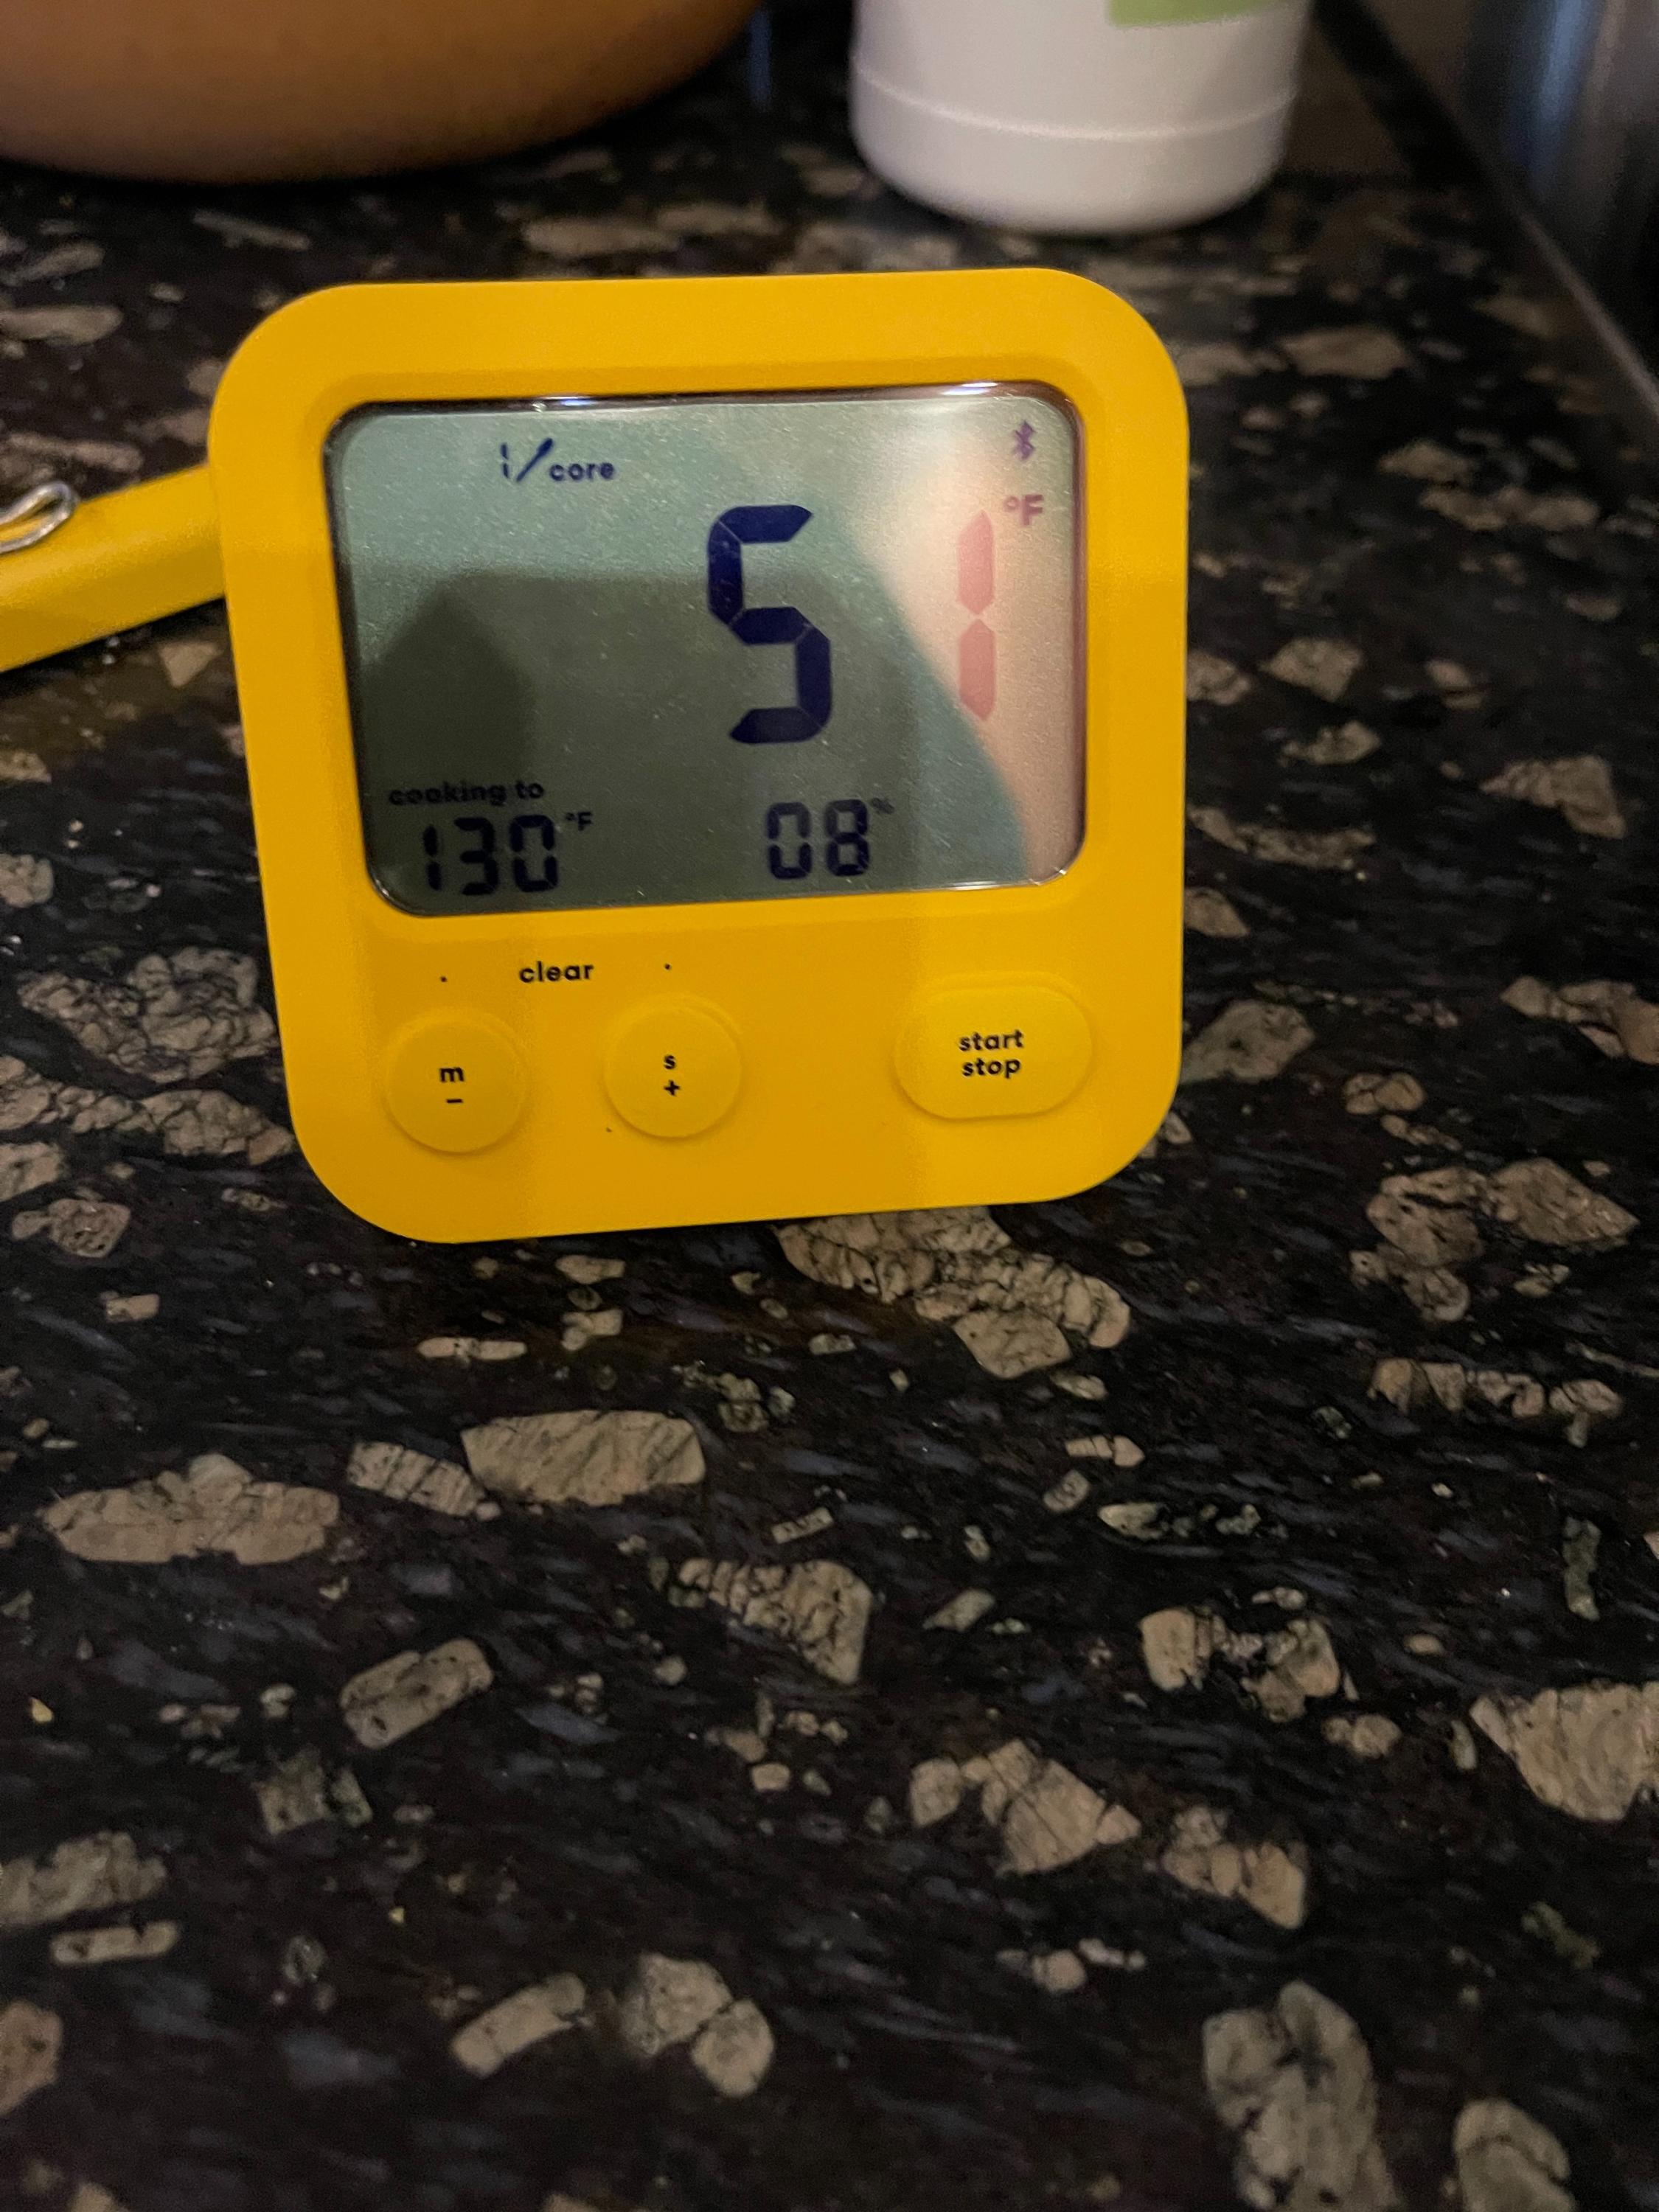 First Cook with the Predictive Thermometer : r/combustion_inc